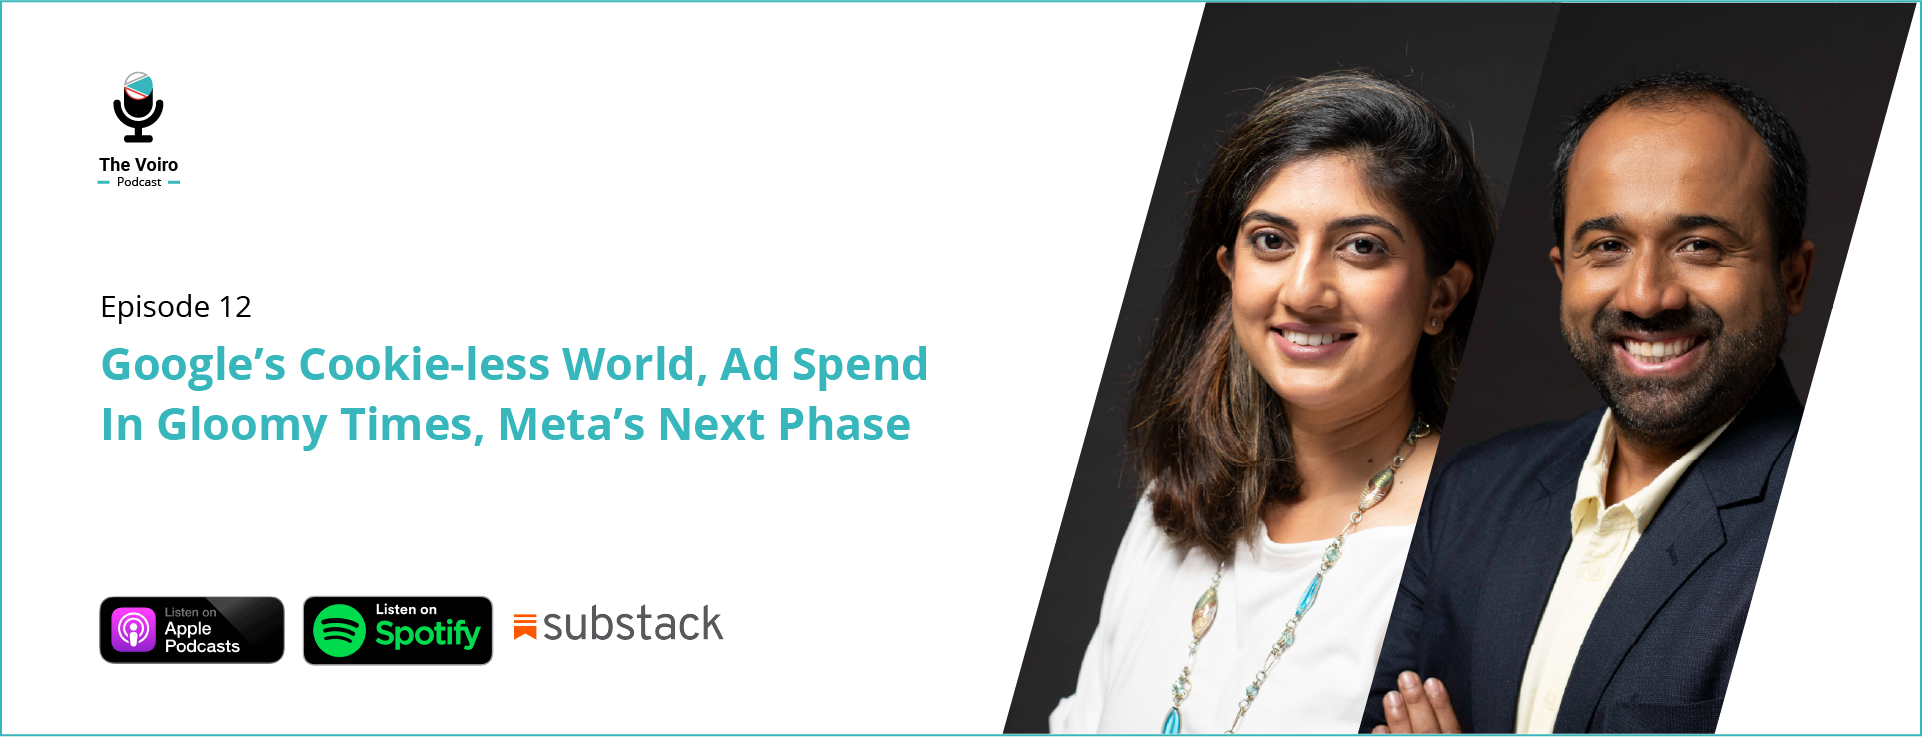 12 - Google’s Cookie-less World, Ad Spend In Gloomy Times, Meta’s Next Phase